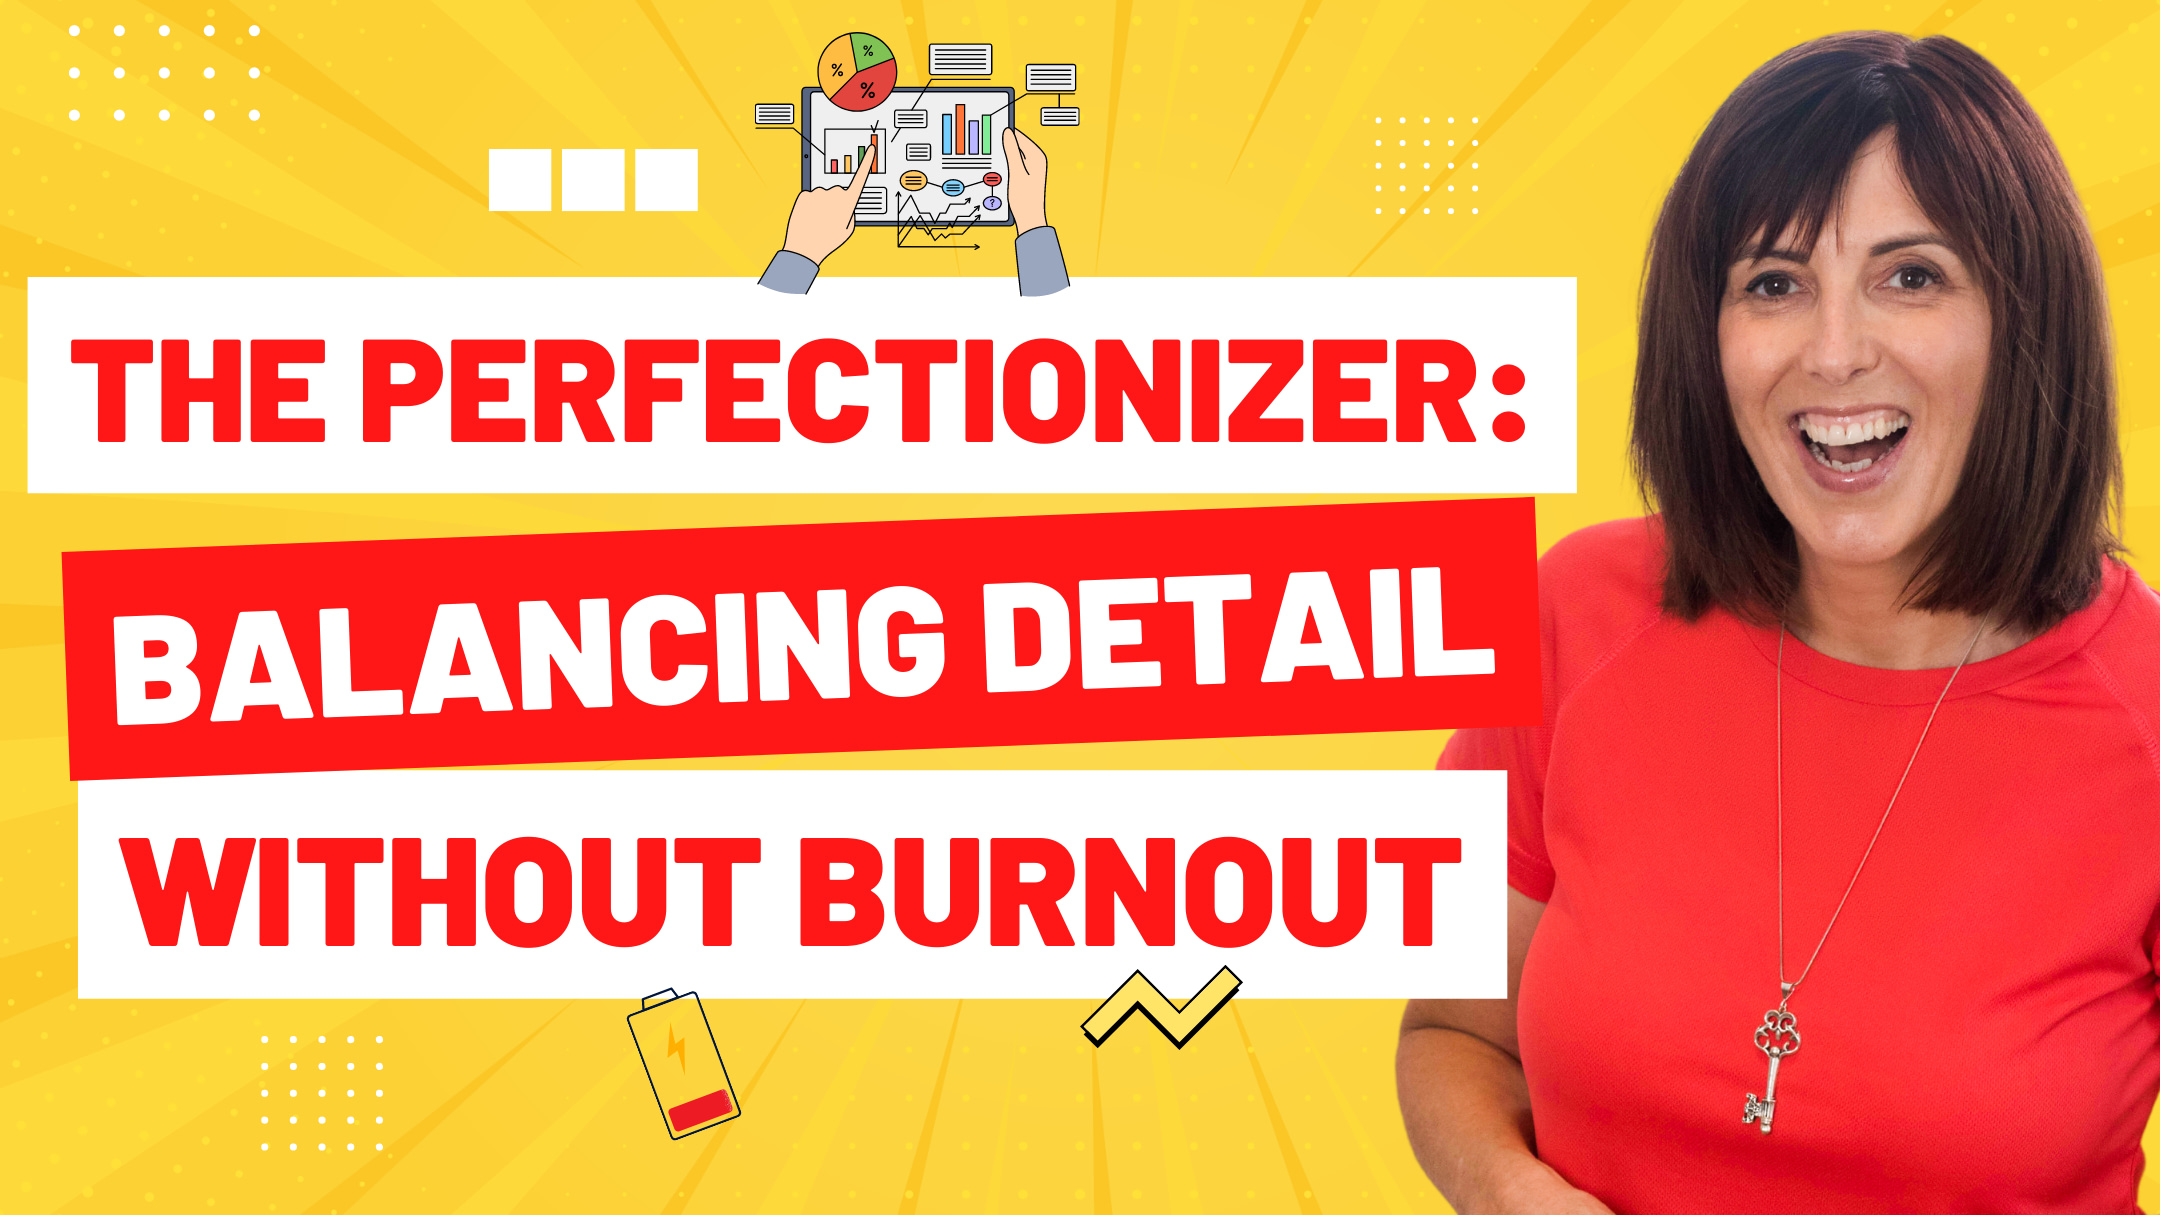 The Perfectionizer: Balancing Detail without Burnout